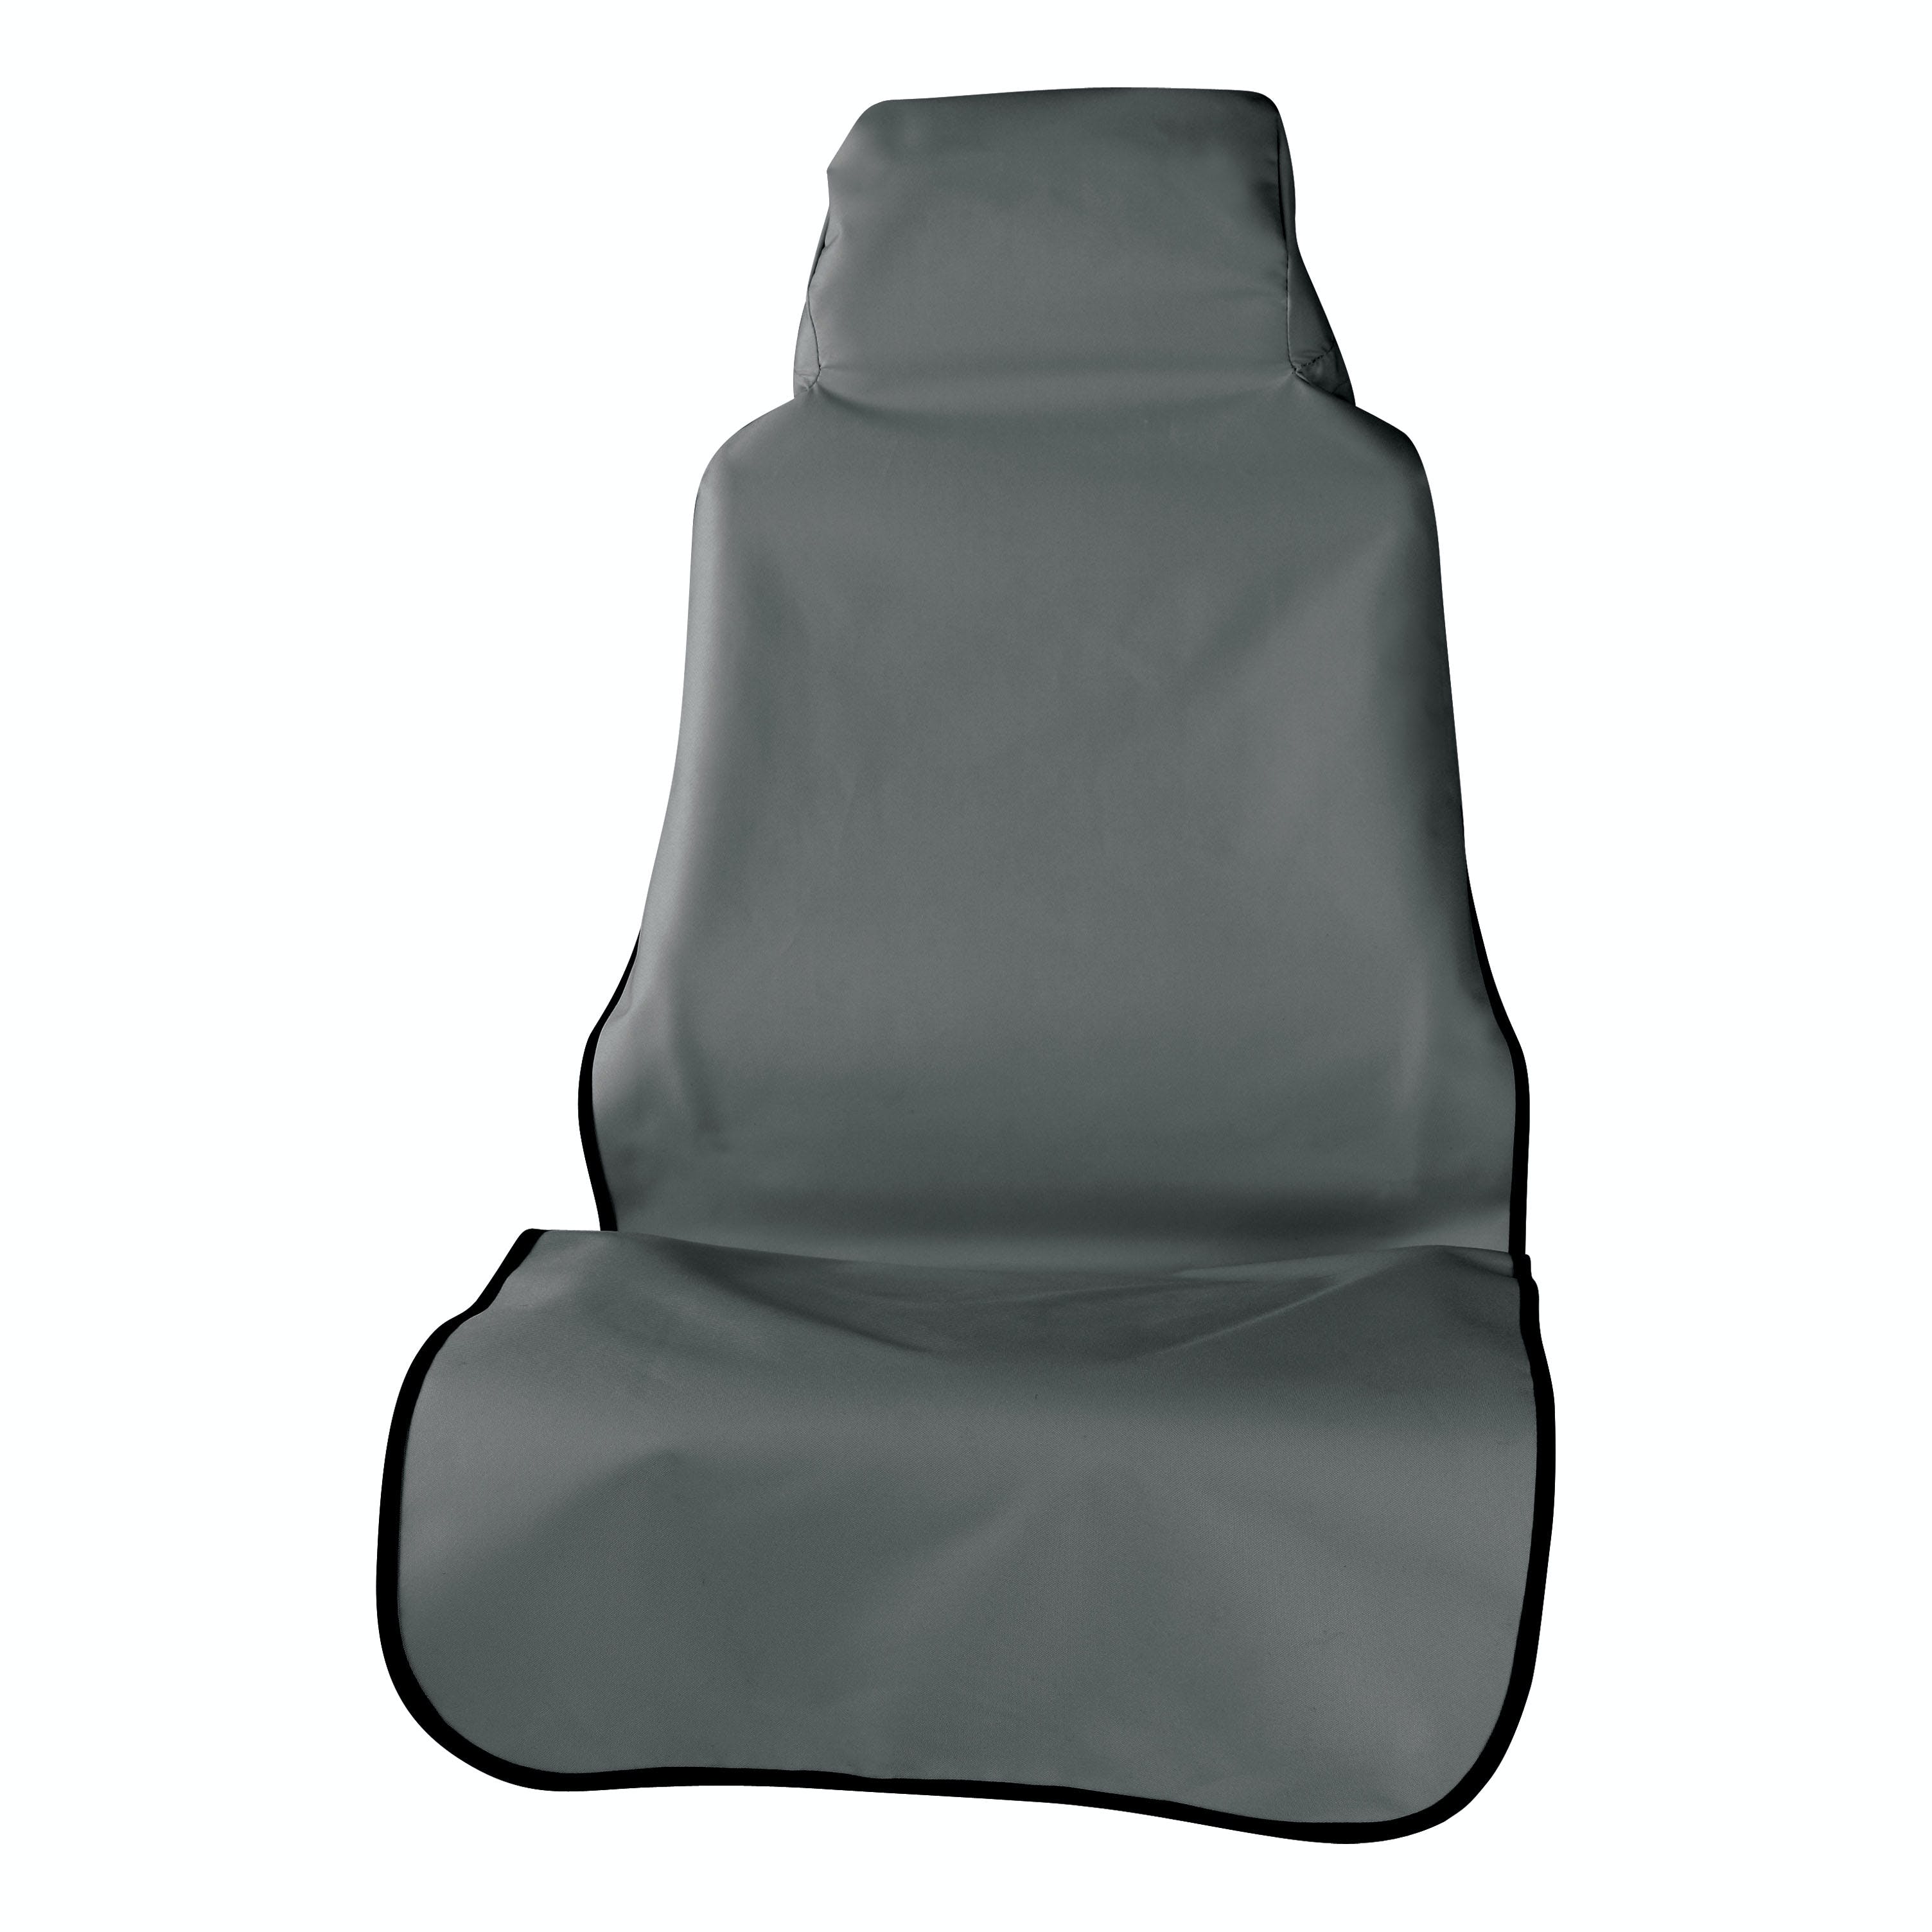 CURT 18500 Seat Defender 58 x 23 Removable Waterproof Grey Bucket Seat Cover